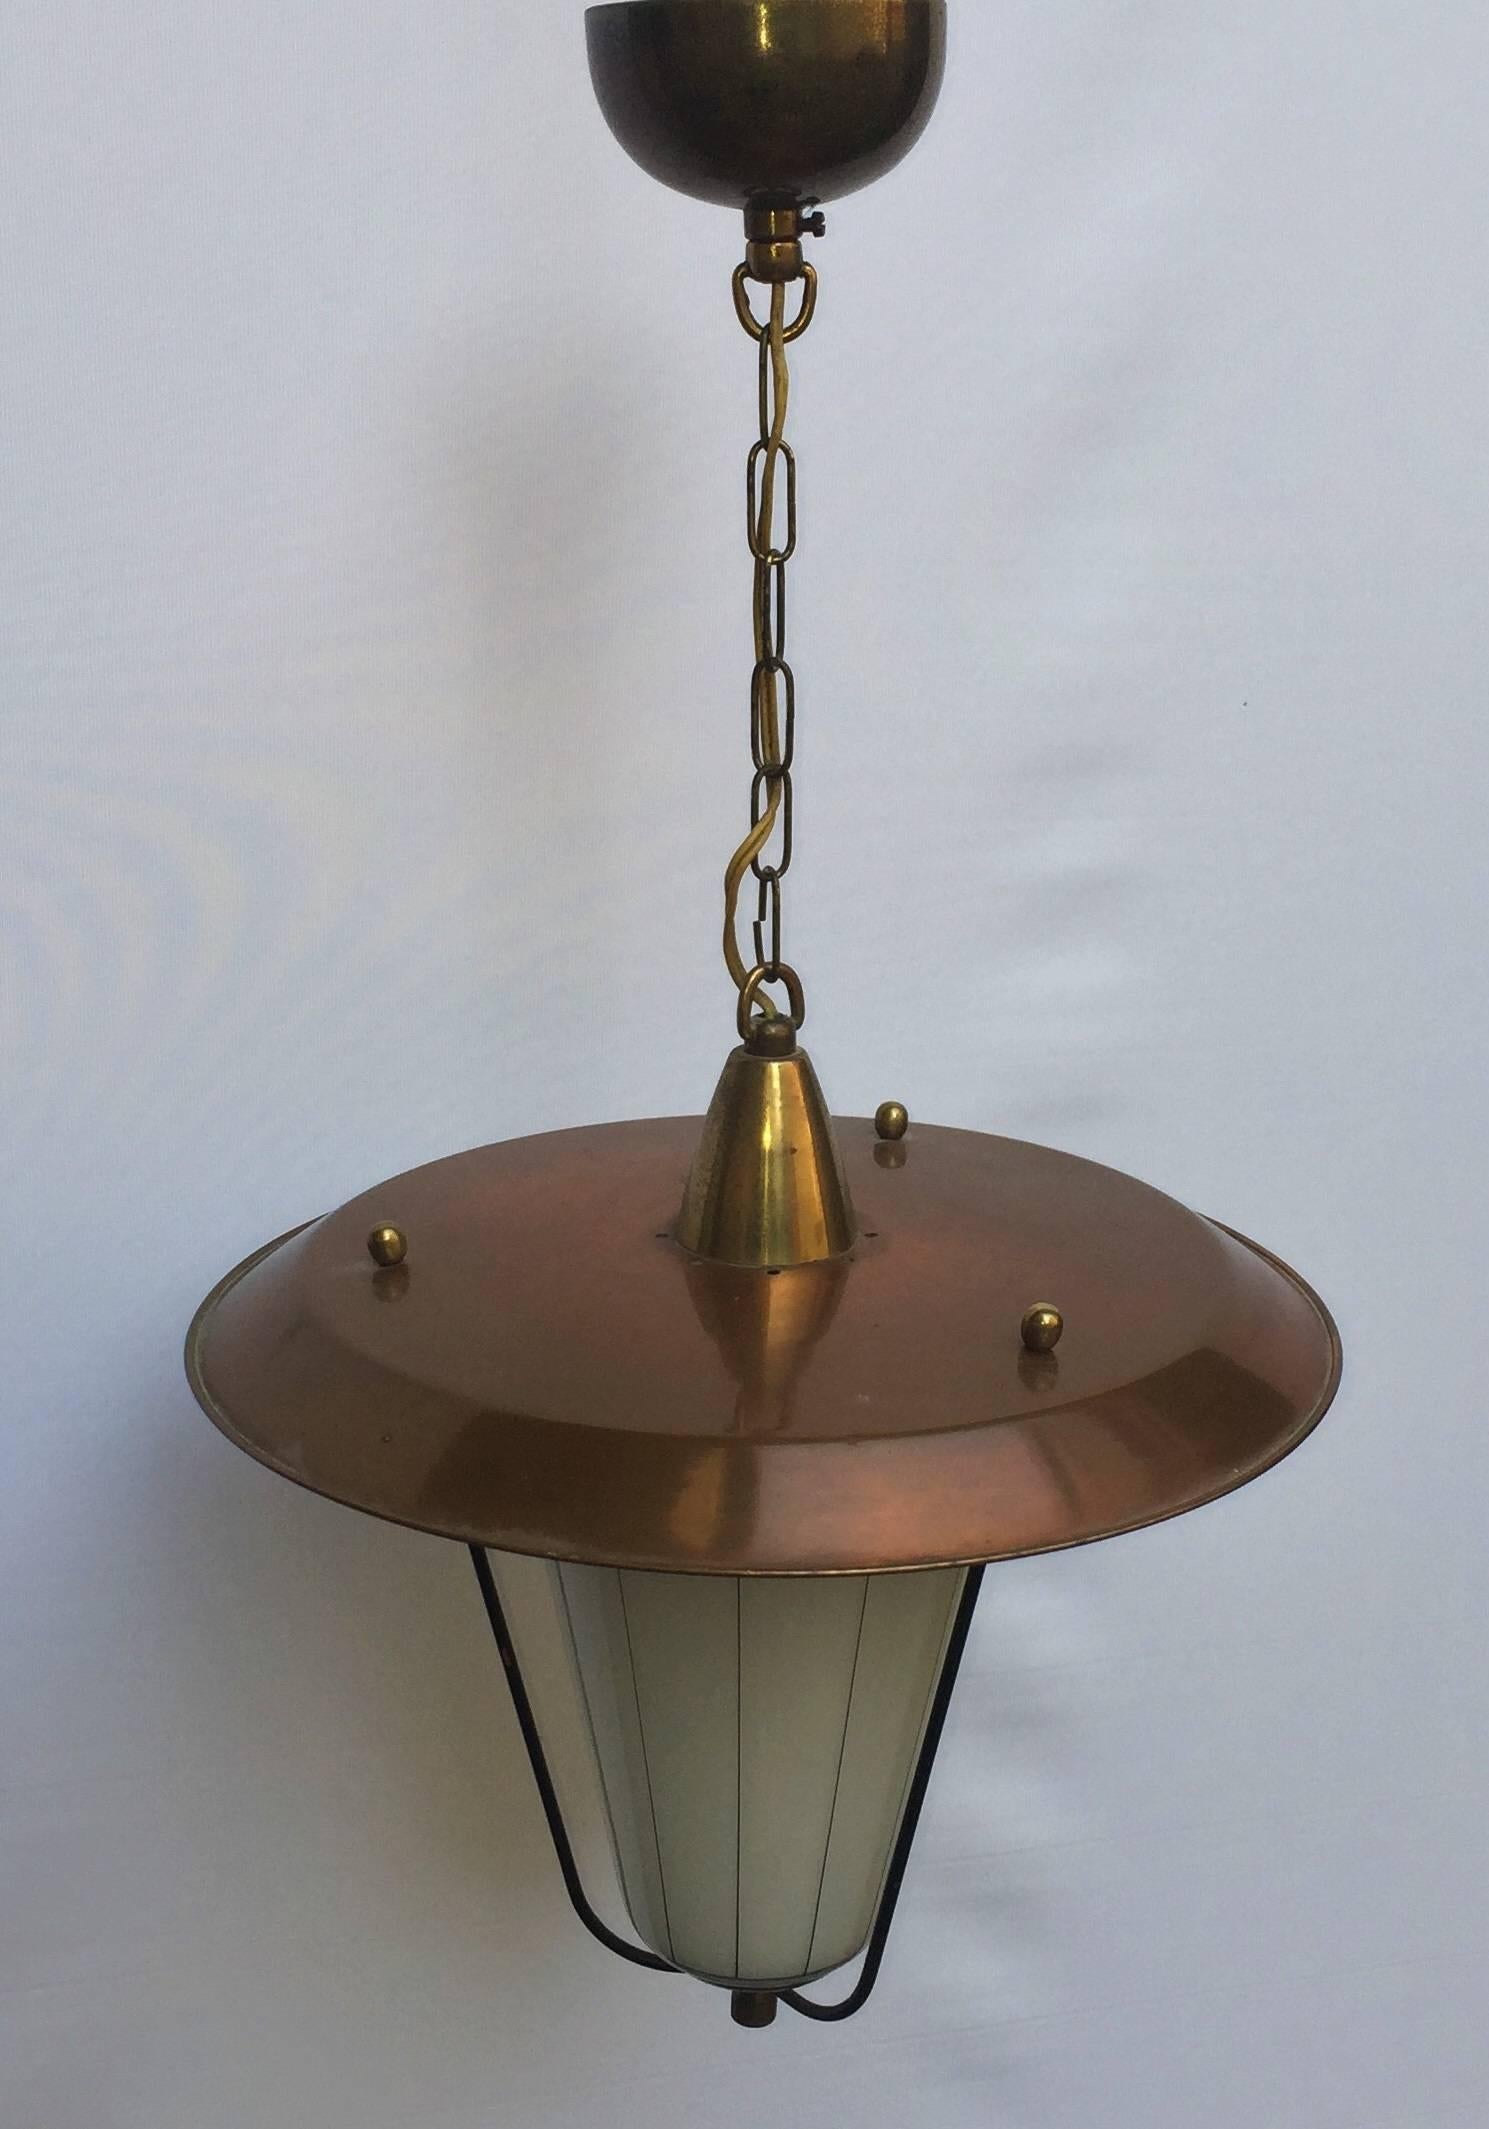 Beautiful midcentury one light hanging Lantern, Austria, circa 1950s.
Brass and copper frame and opaline glass shade with pinstripe decor.
Socket: one x e27 for standard screw bulbs.
Excellent condition.
 